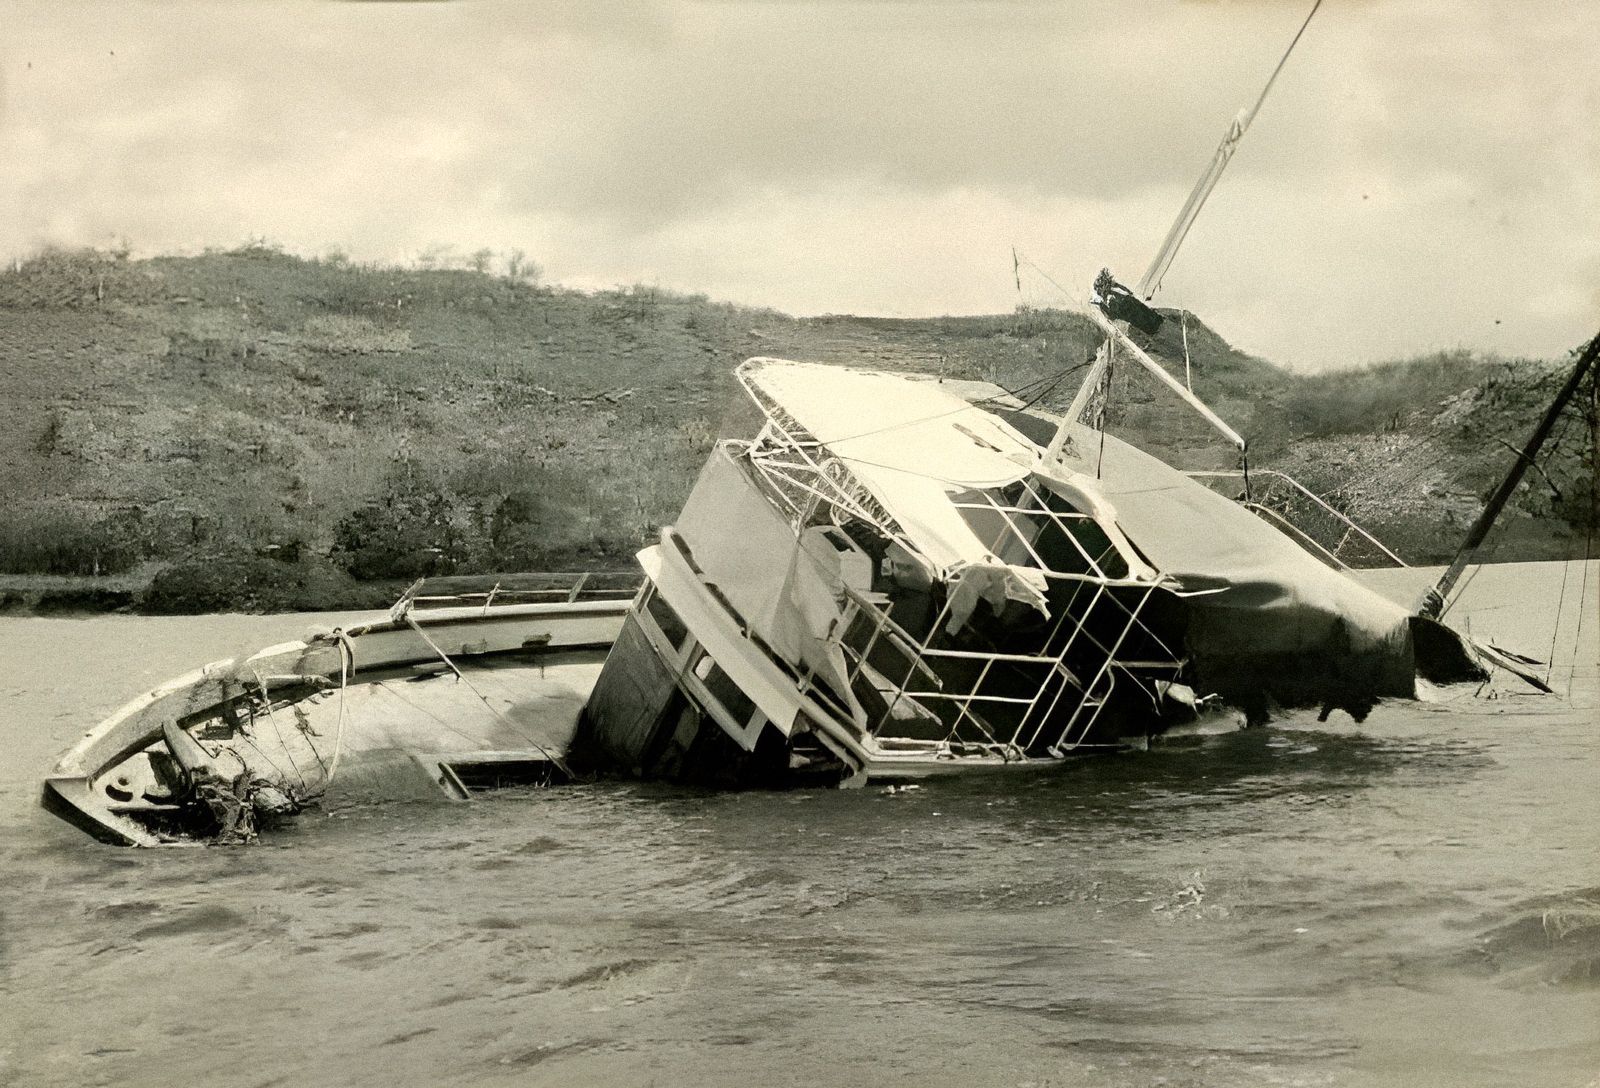 Unsolved mystery of MV Joyita: What happened to the people aboard? 3